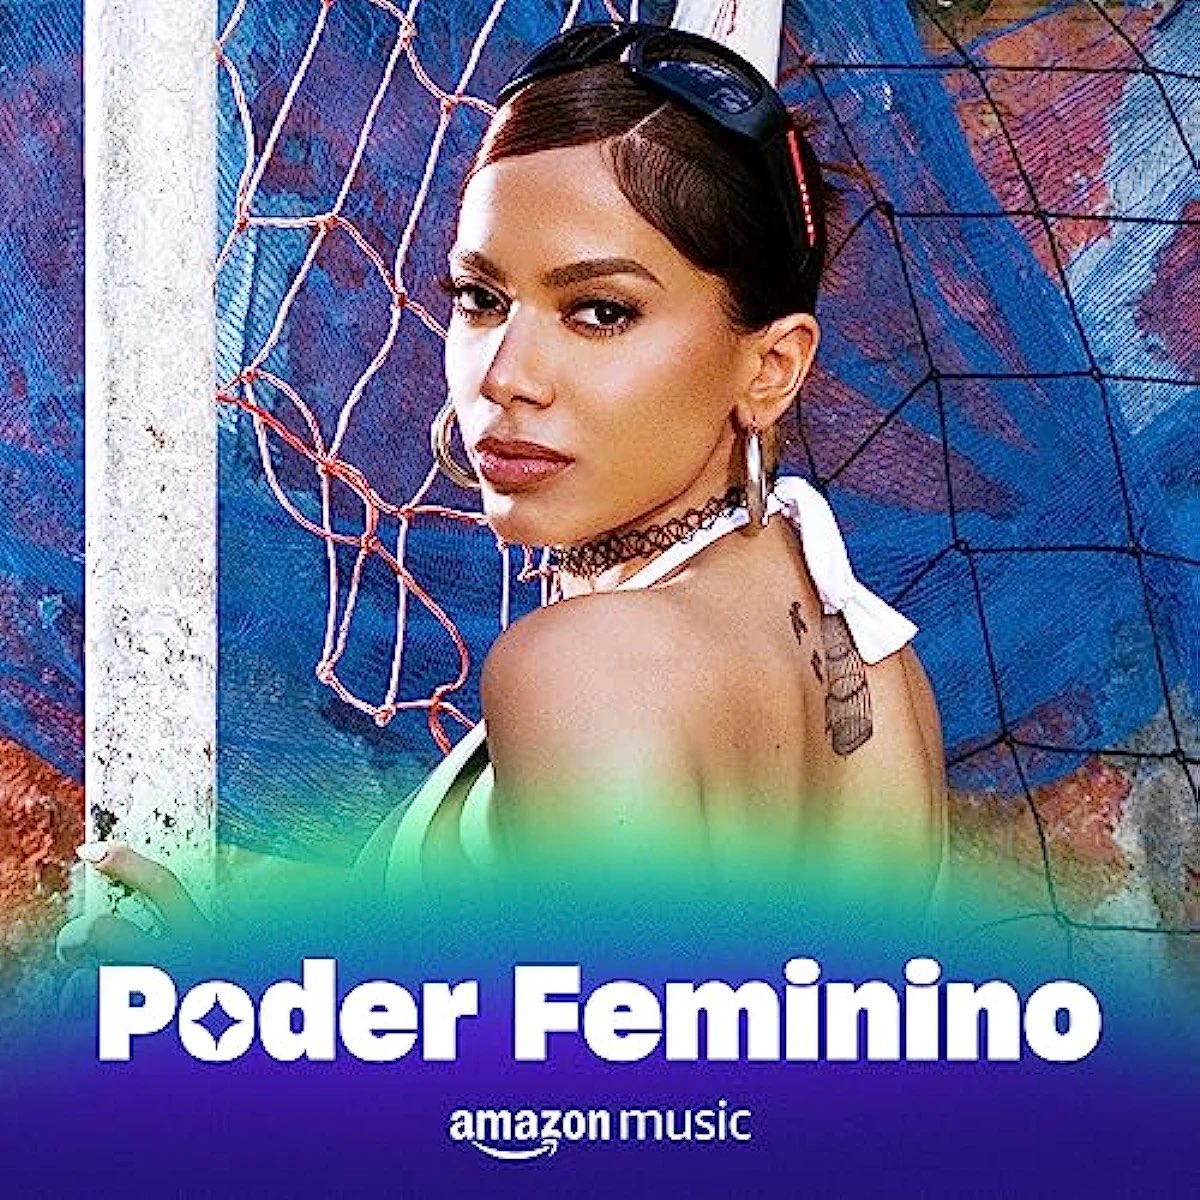 Anitta is on the cover of Amazon Music’s “Pop Mix” and “Poder Feminino” playlists with “#FunkRave ” at #1.